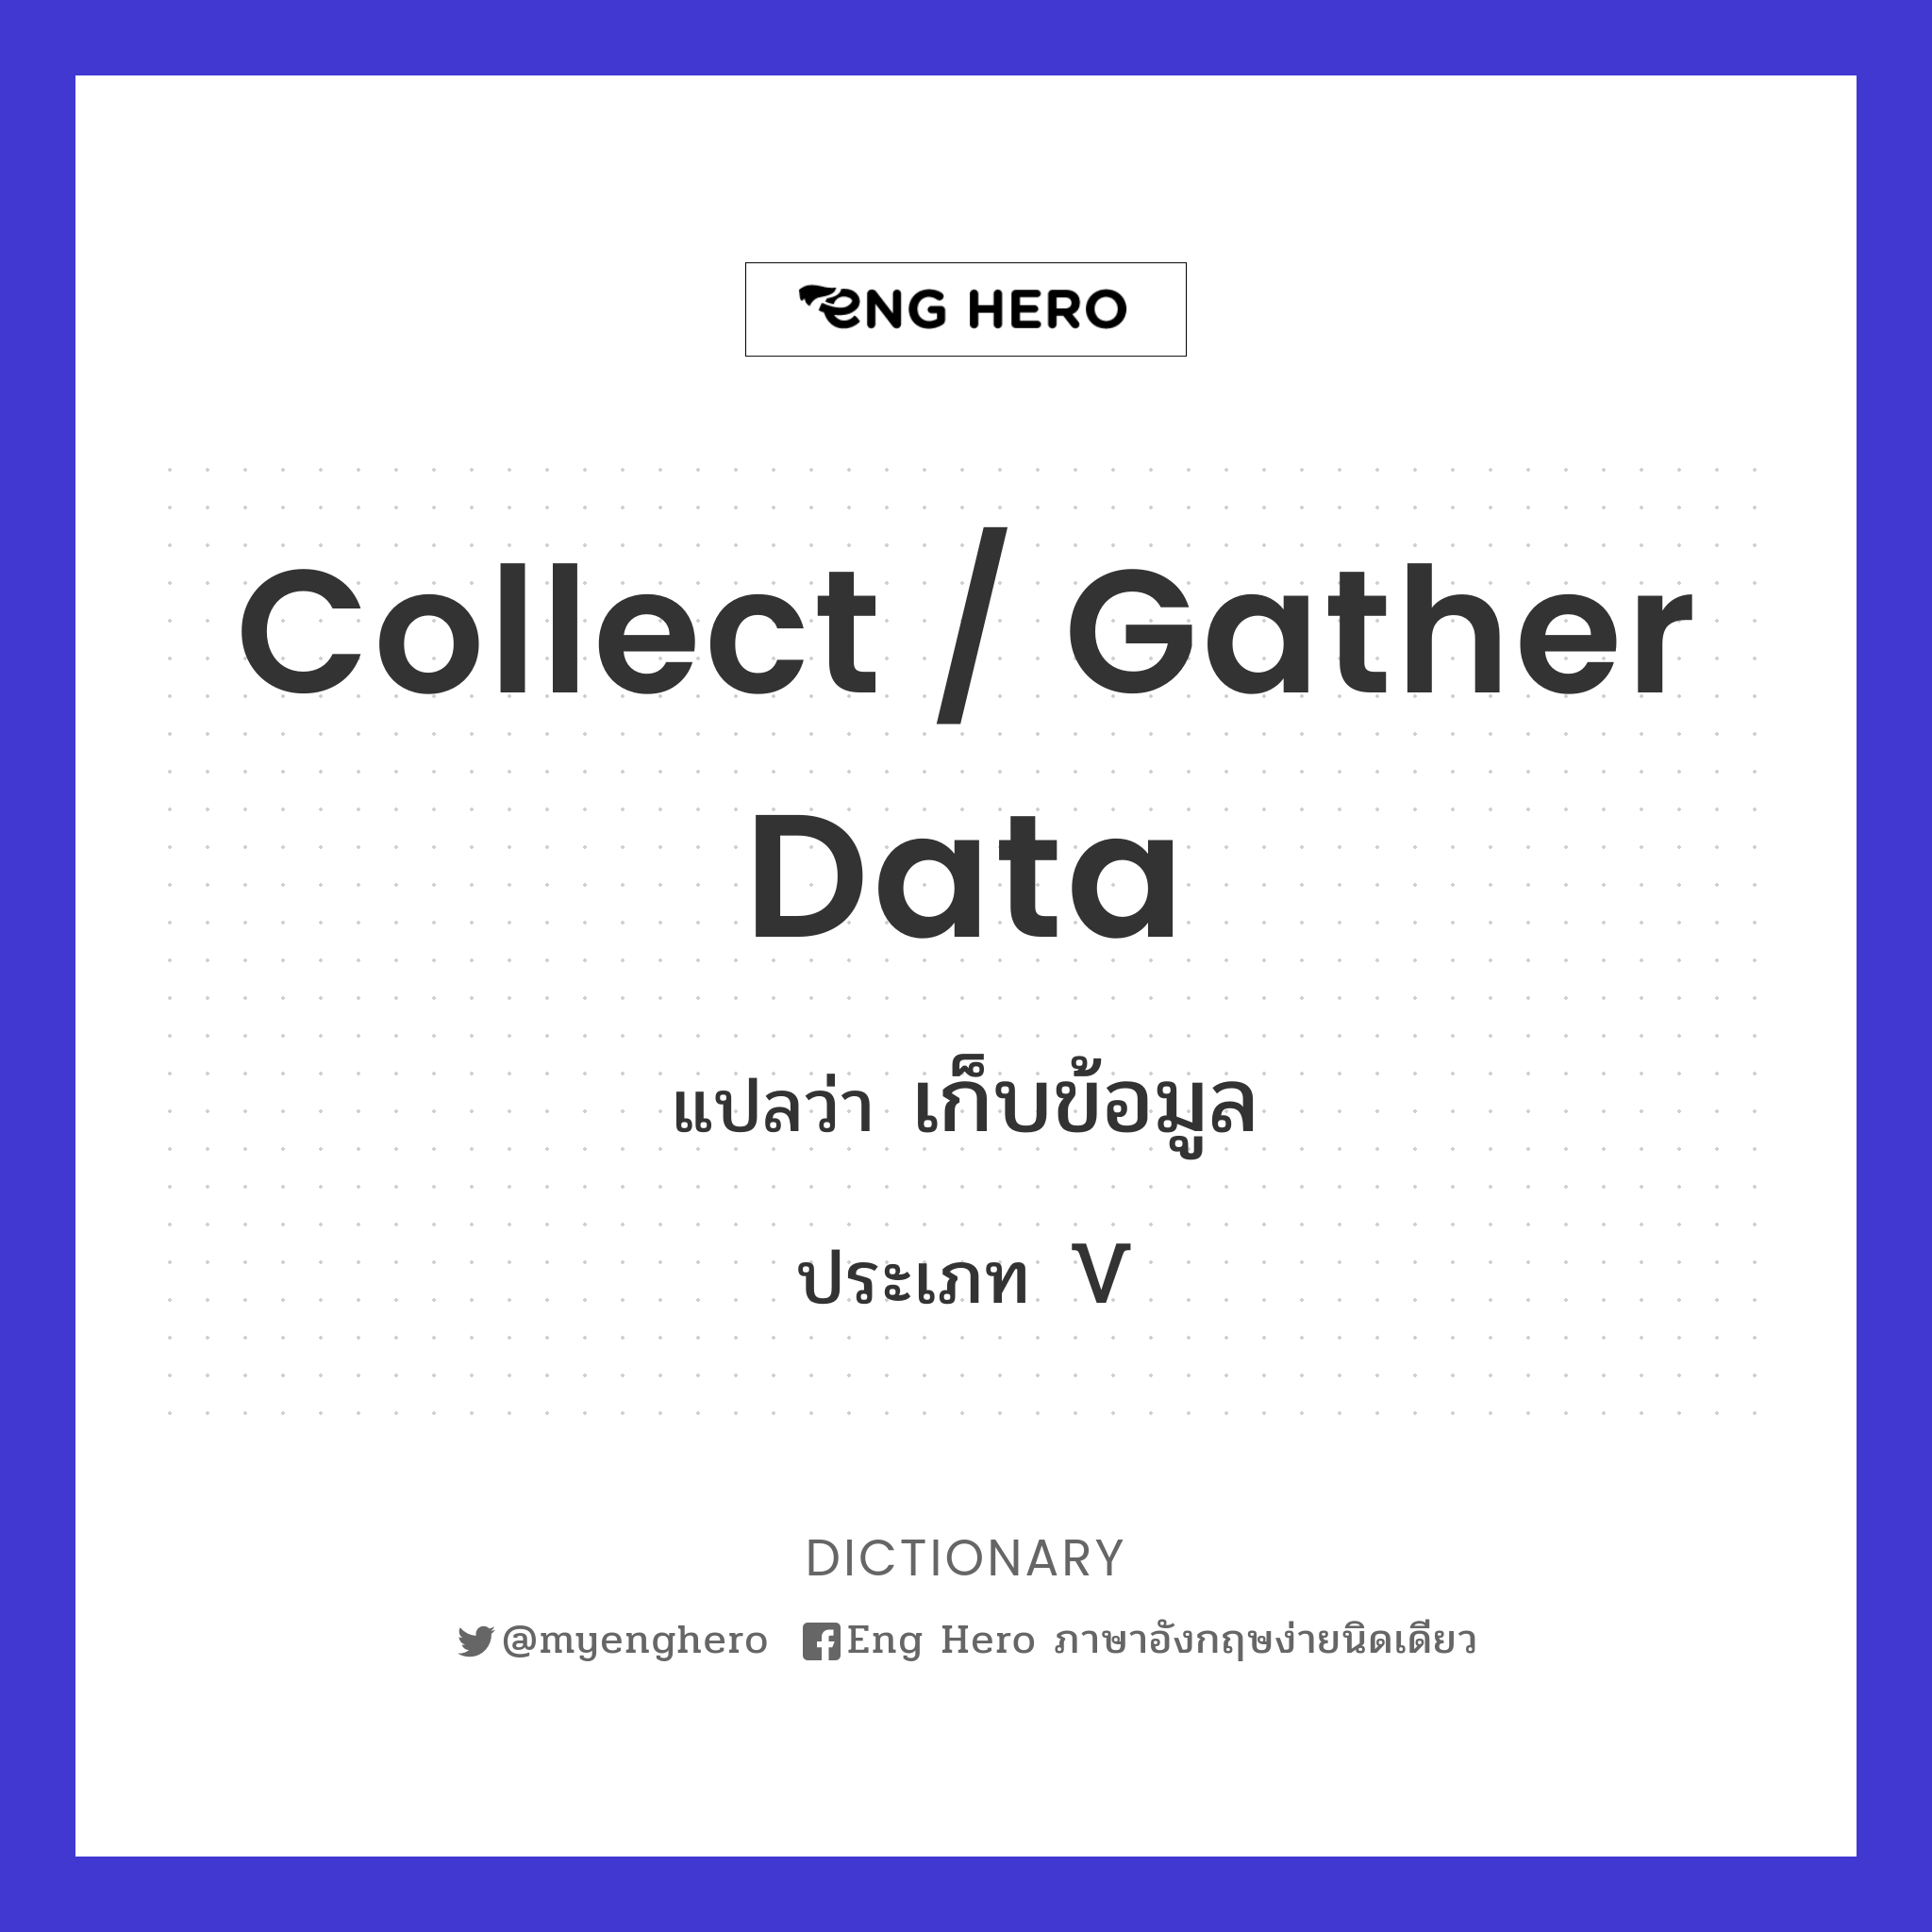 collect / gather data